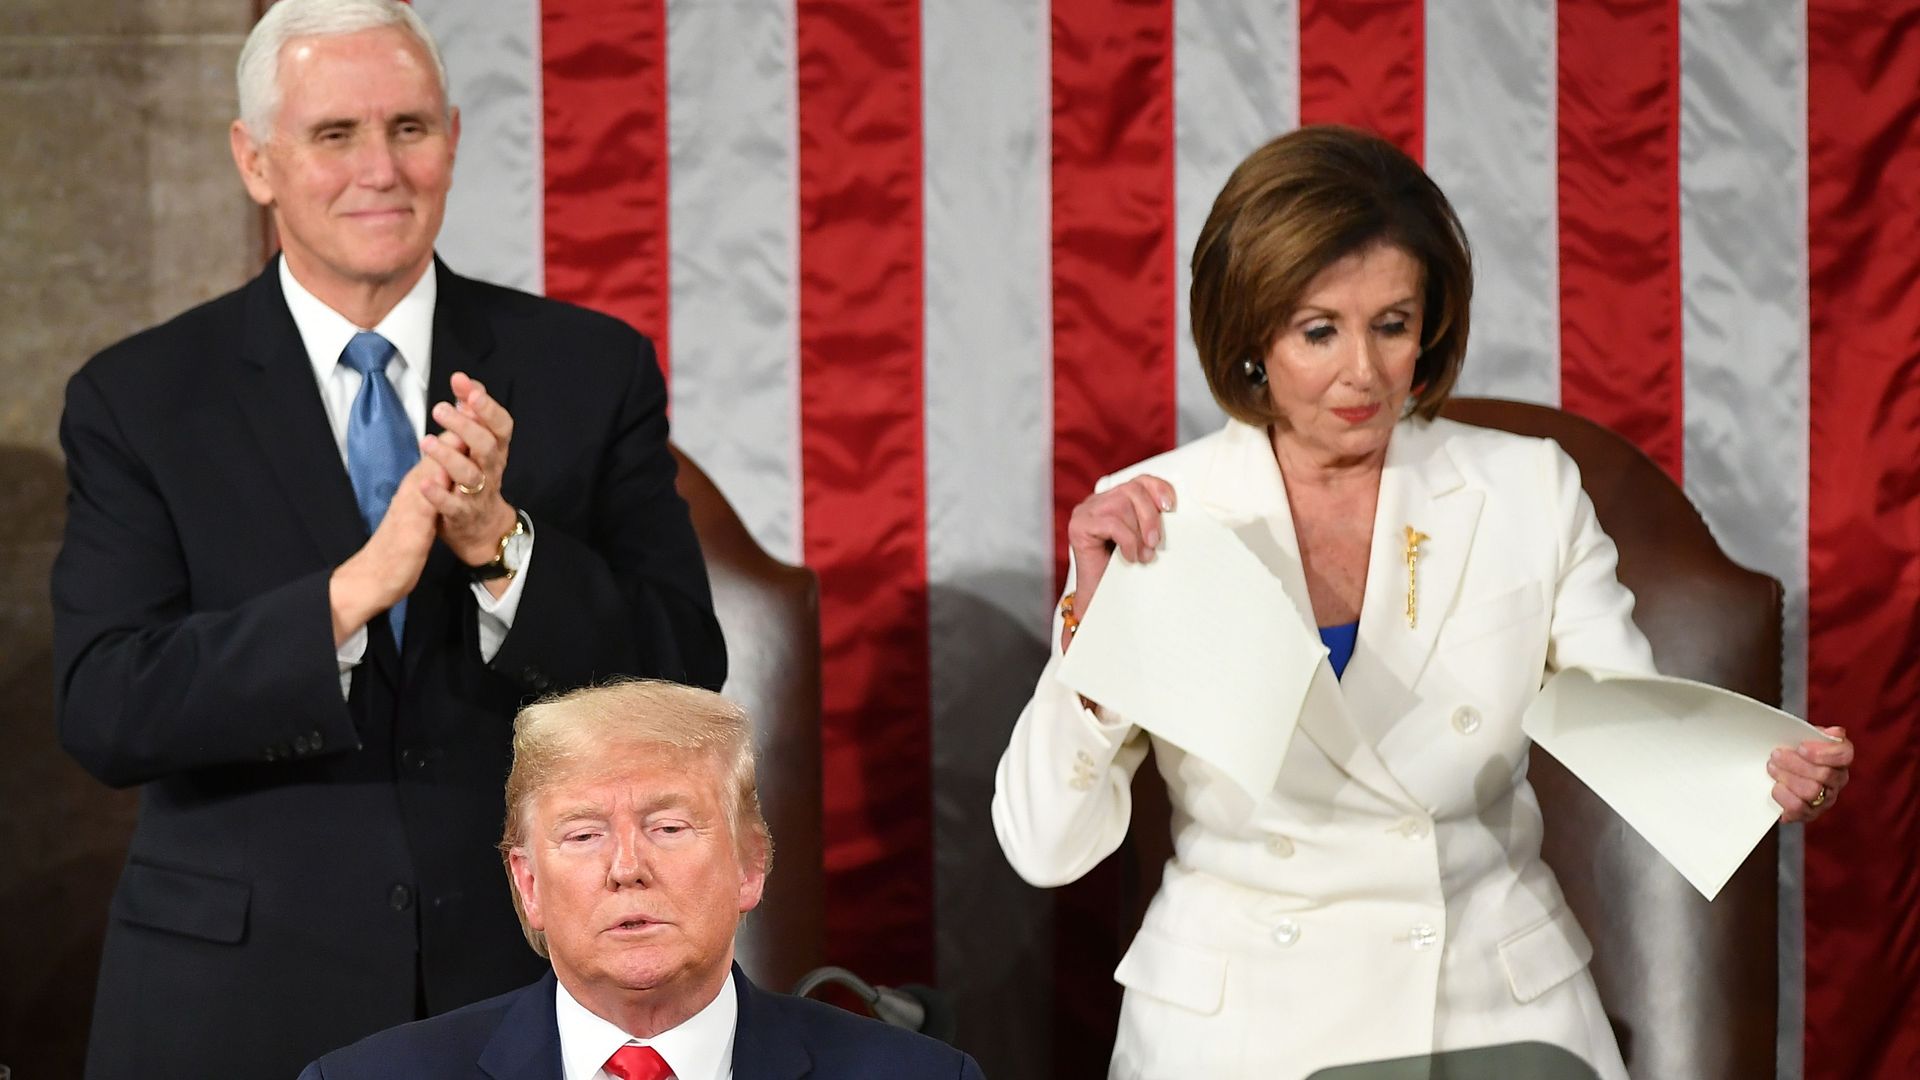 Vice President Mike Pence claps as Speaker of the US House of Representatives Nancy Pelosi appears to rip a copy of US President Donald Trumps speech